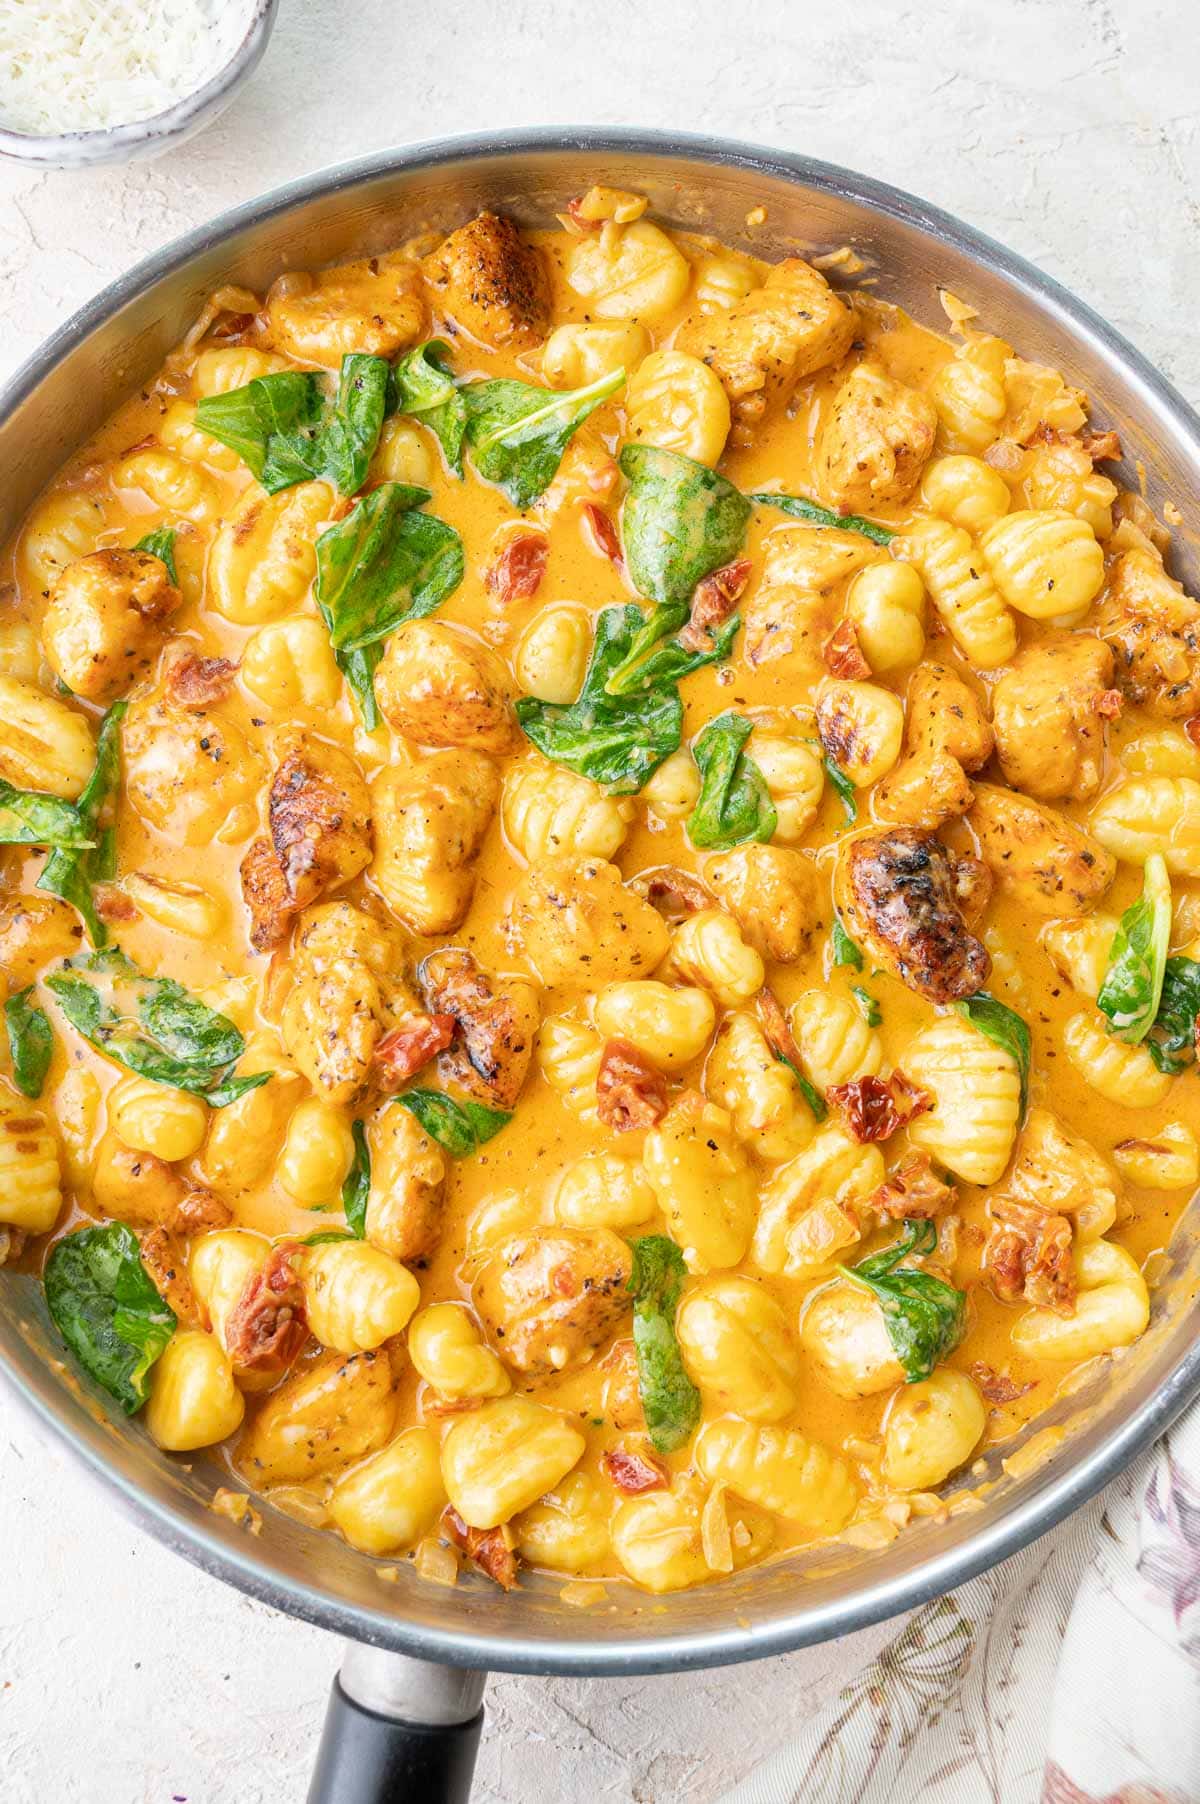 Creamy Tuscan chicken with gnocchi and spinach in a pan.